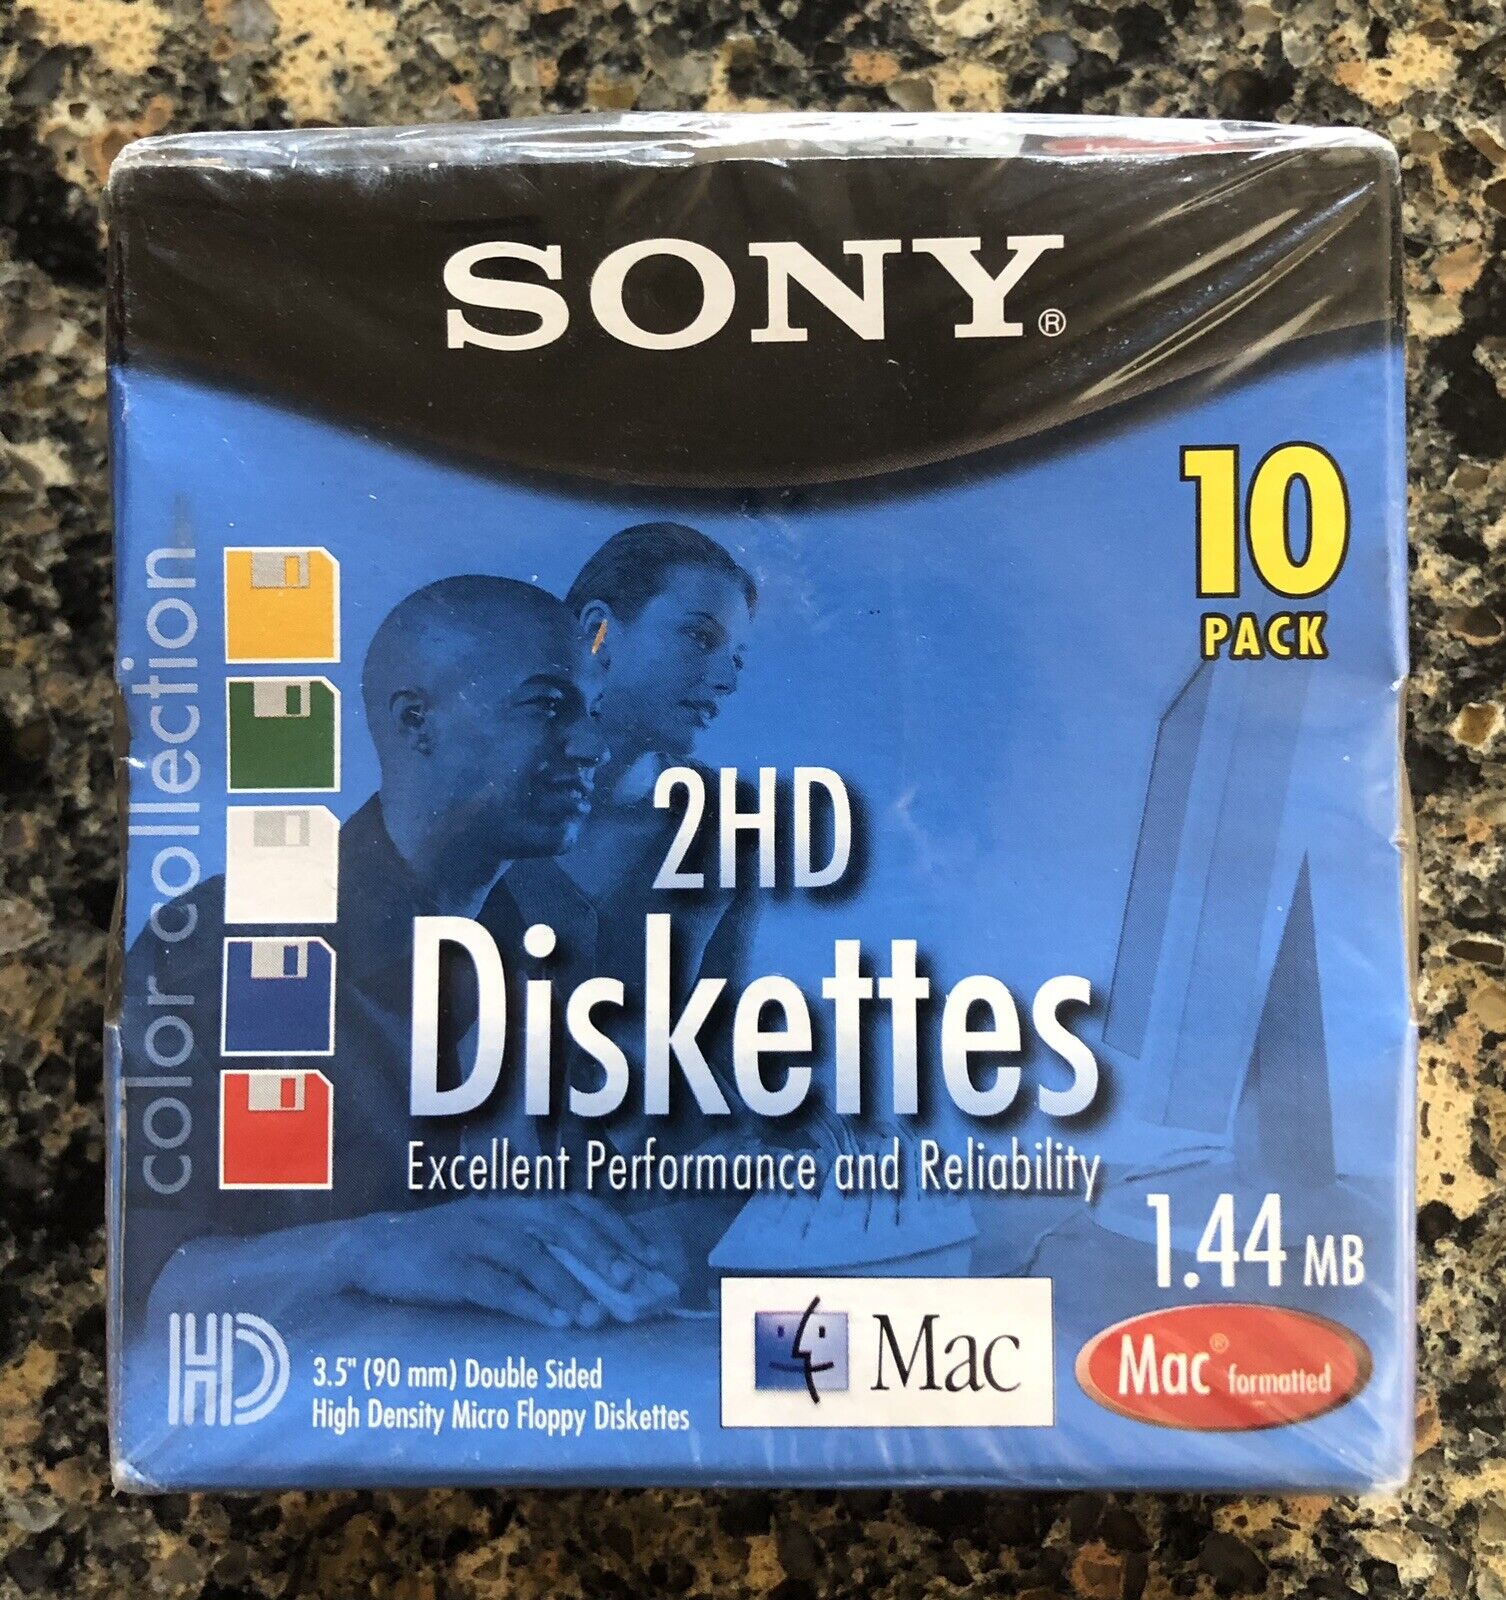 Diskettes Sony Mac Apple Formatted 2HD 10 Pack 3.5”  Macintosh 1.44 MB NEW